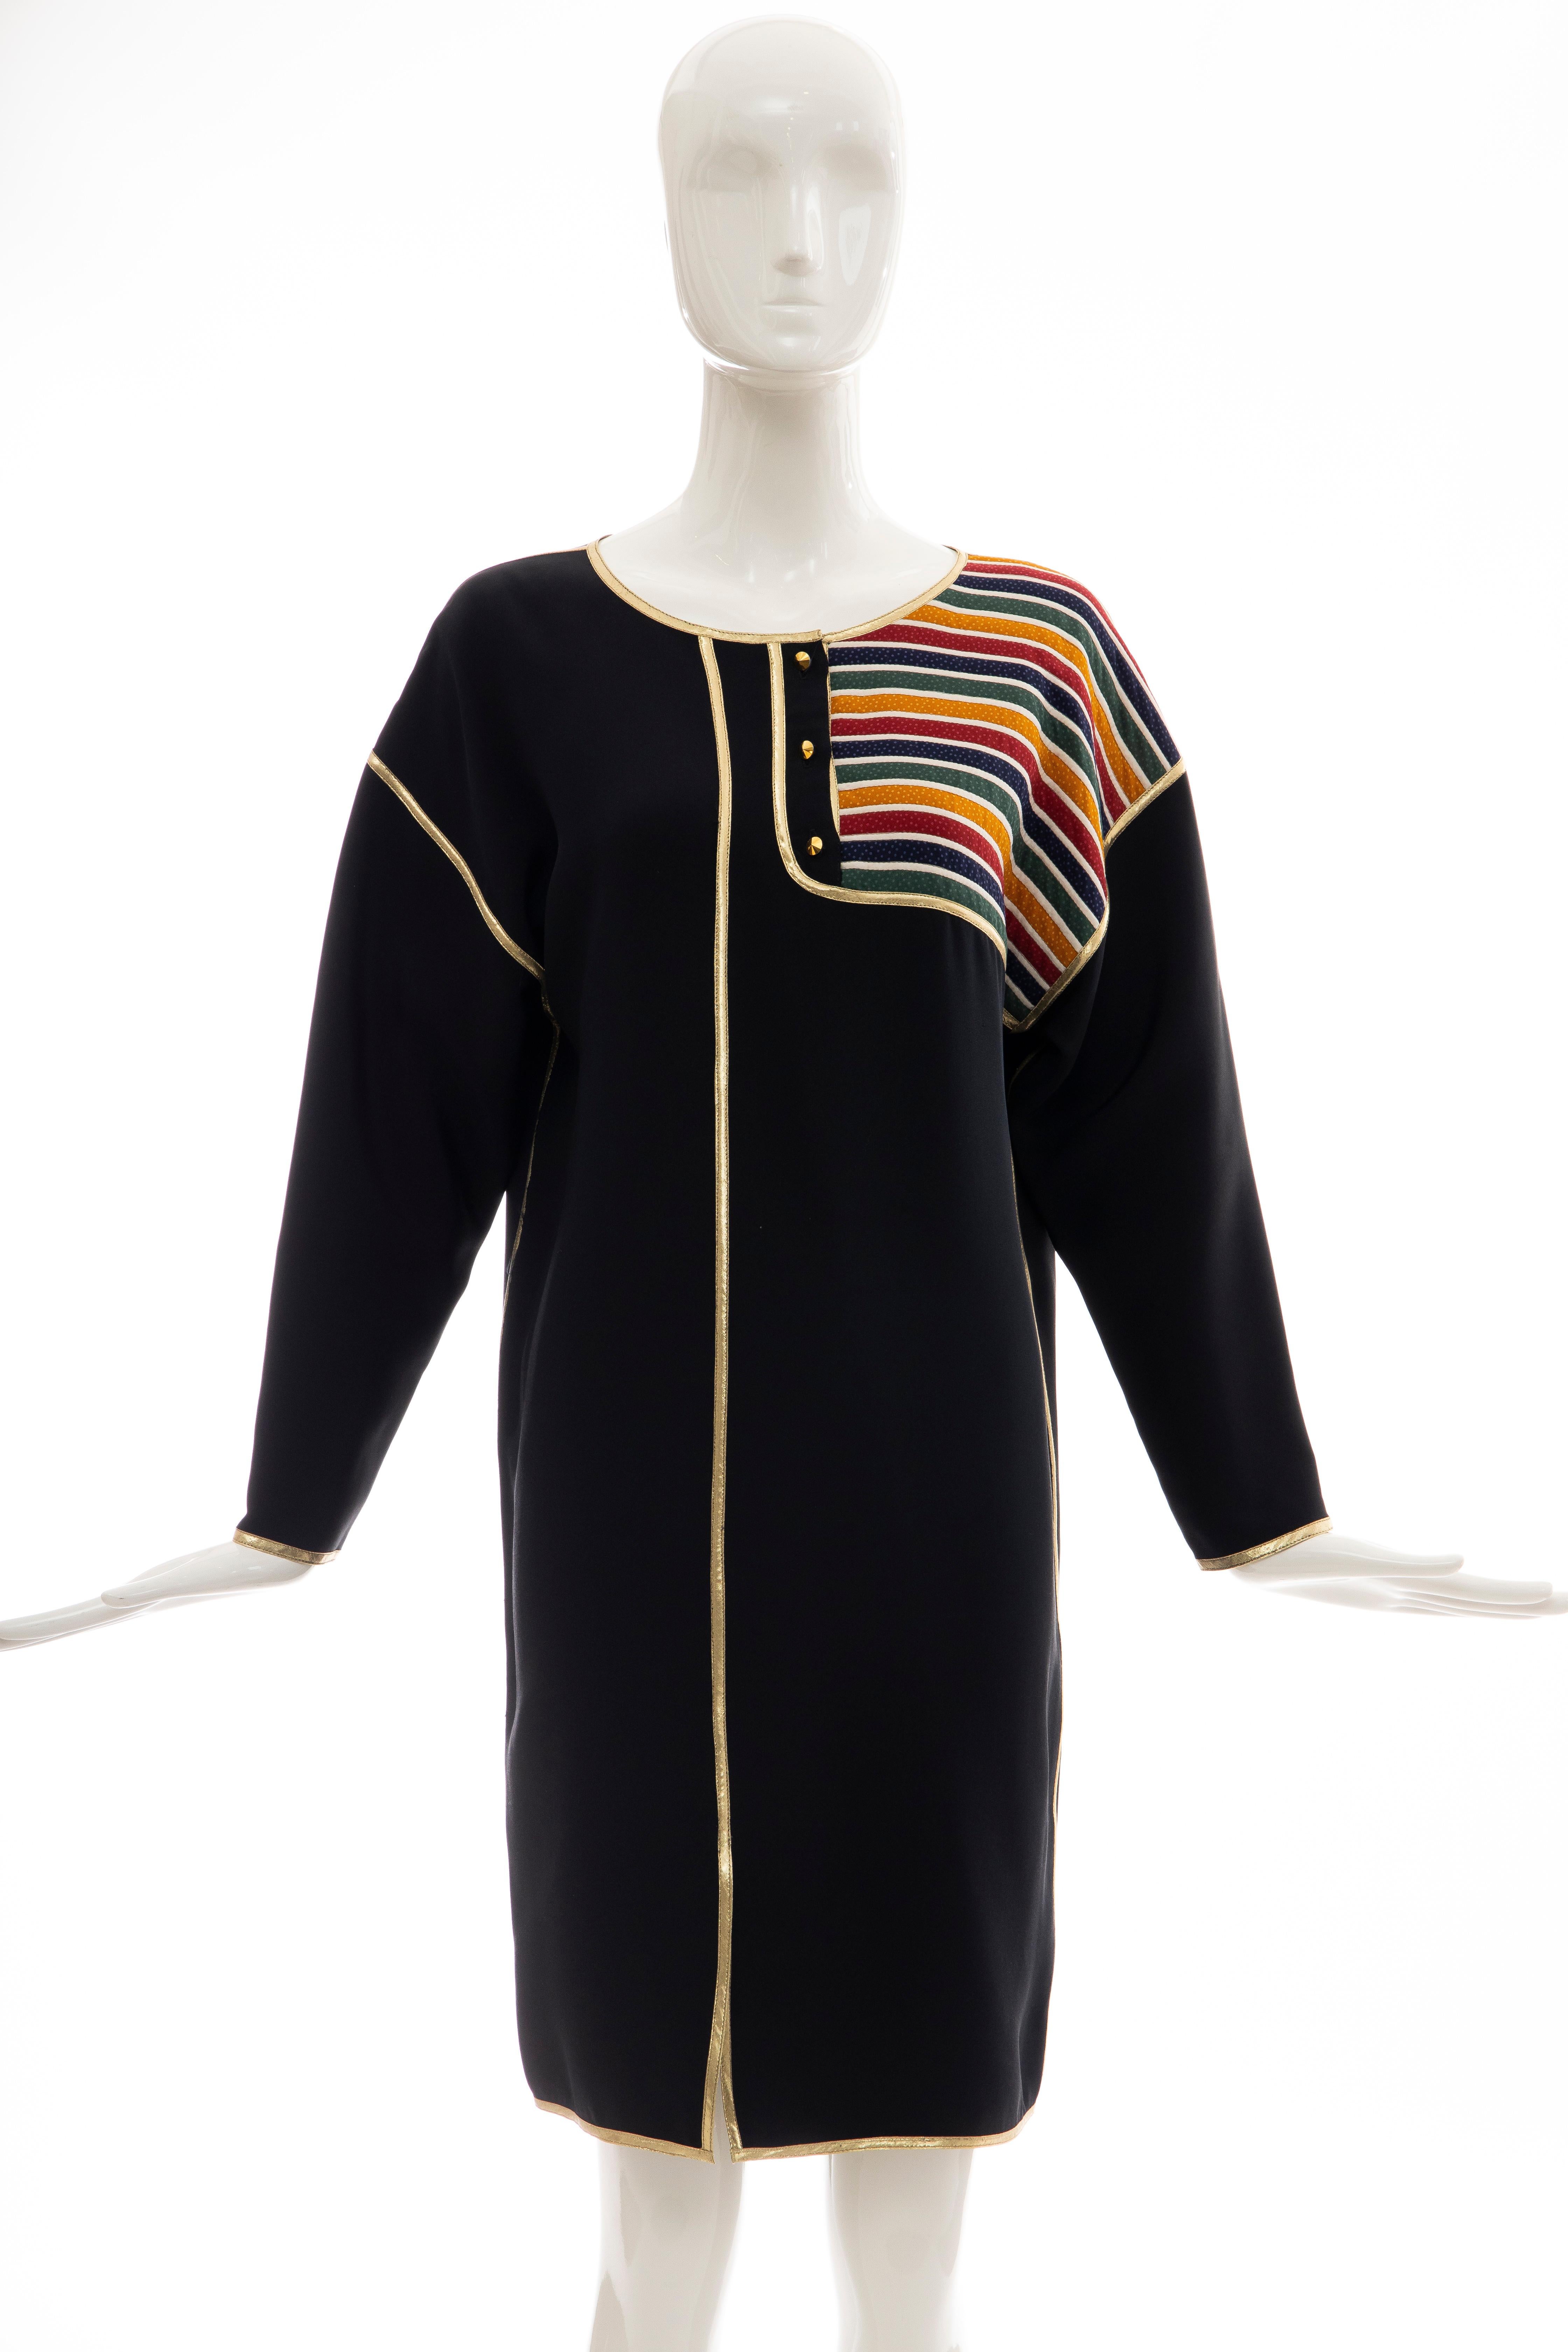 Geoffrey Beene, Fall 1993 silk navy blue multicolored striped quilted button front shift dress with gold lame trim.

US. 6

Bust: 40, Waist: 39, Hips: 39, Shoulder: 22, Sleeve: 18, Length: 37